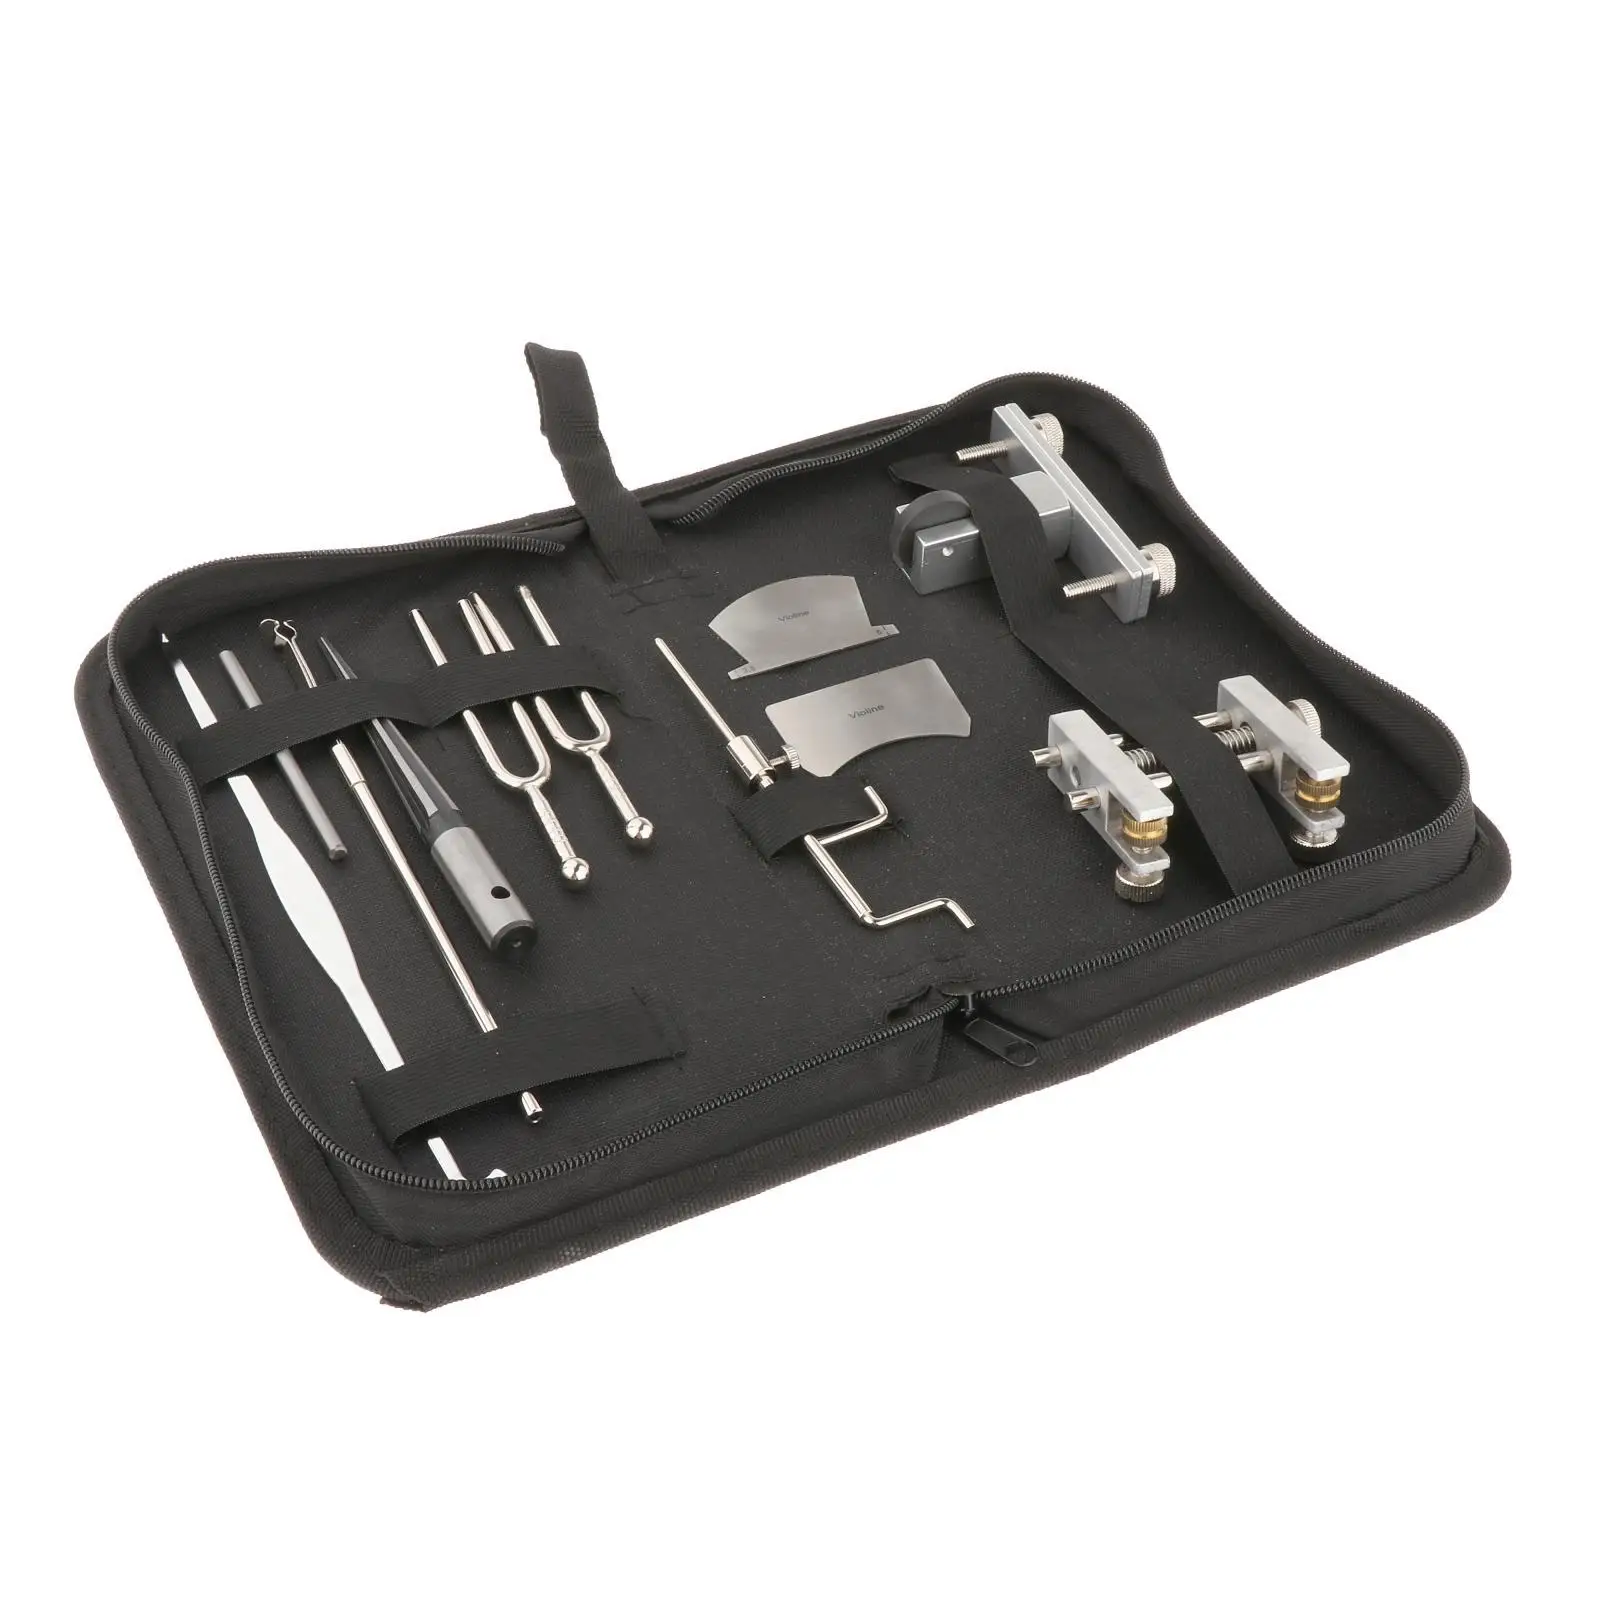 Violin Repairing Tools Set with Carrying Case Violin Making Retriever Clip Tuning Fork Viola Accessory Edge Clamps Luthier Tool